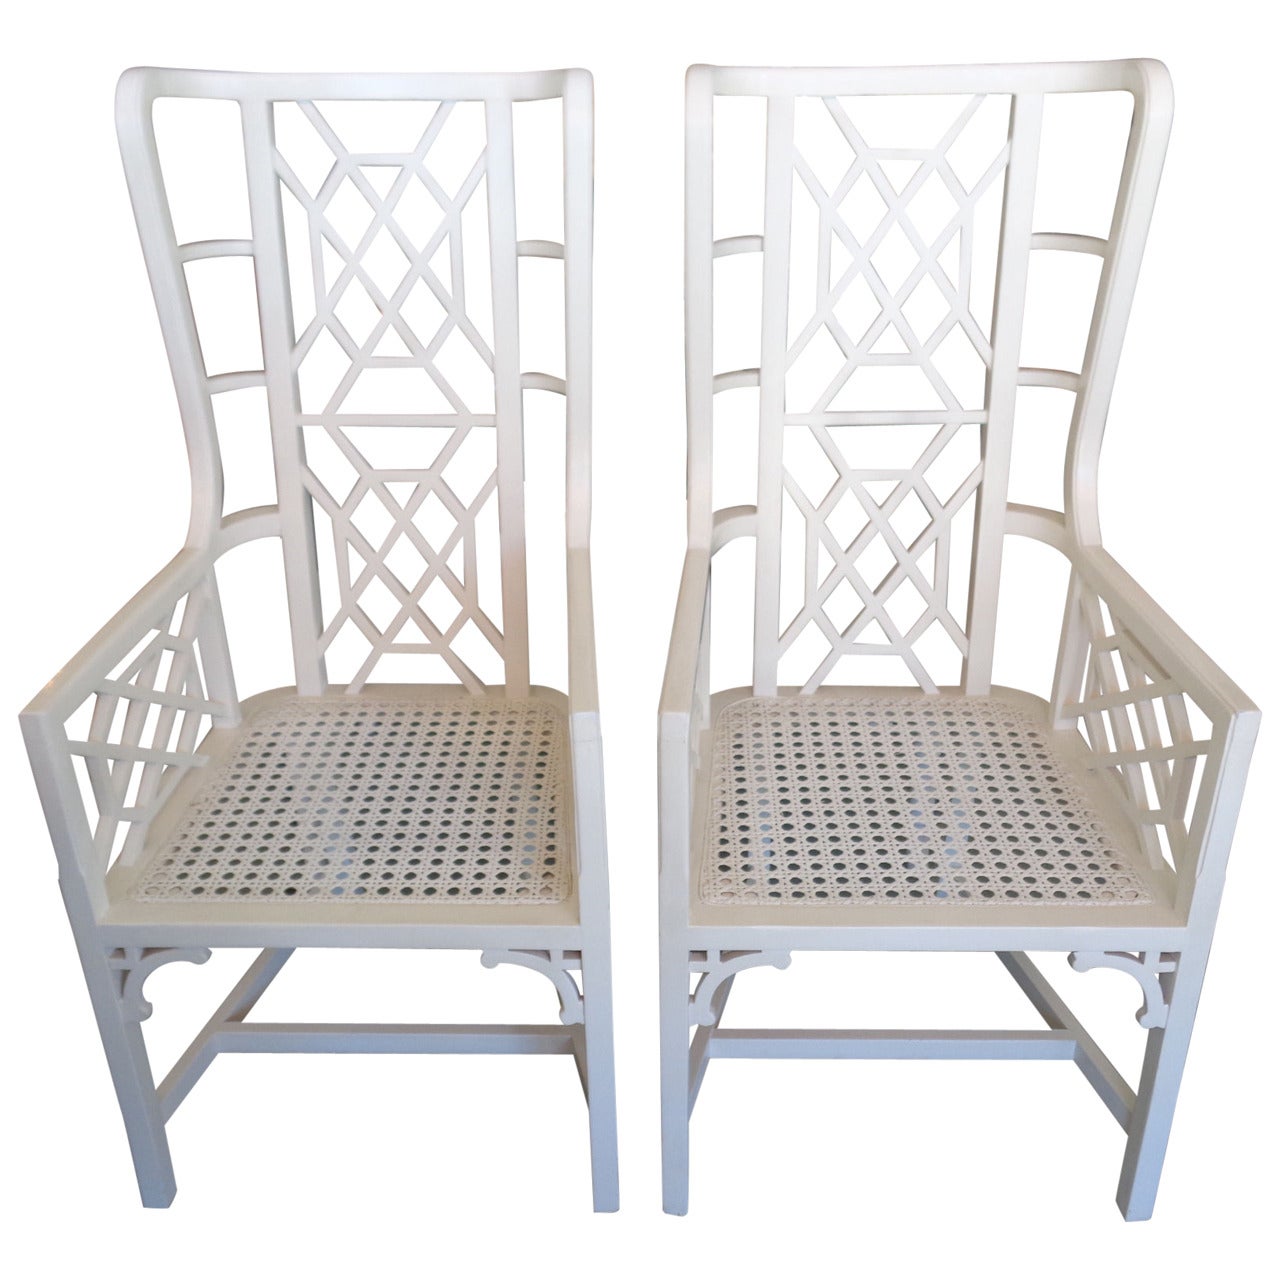 Pair of Hollywood Regency Style Fretwork Wing Chairs